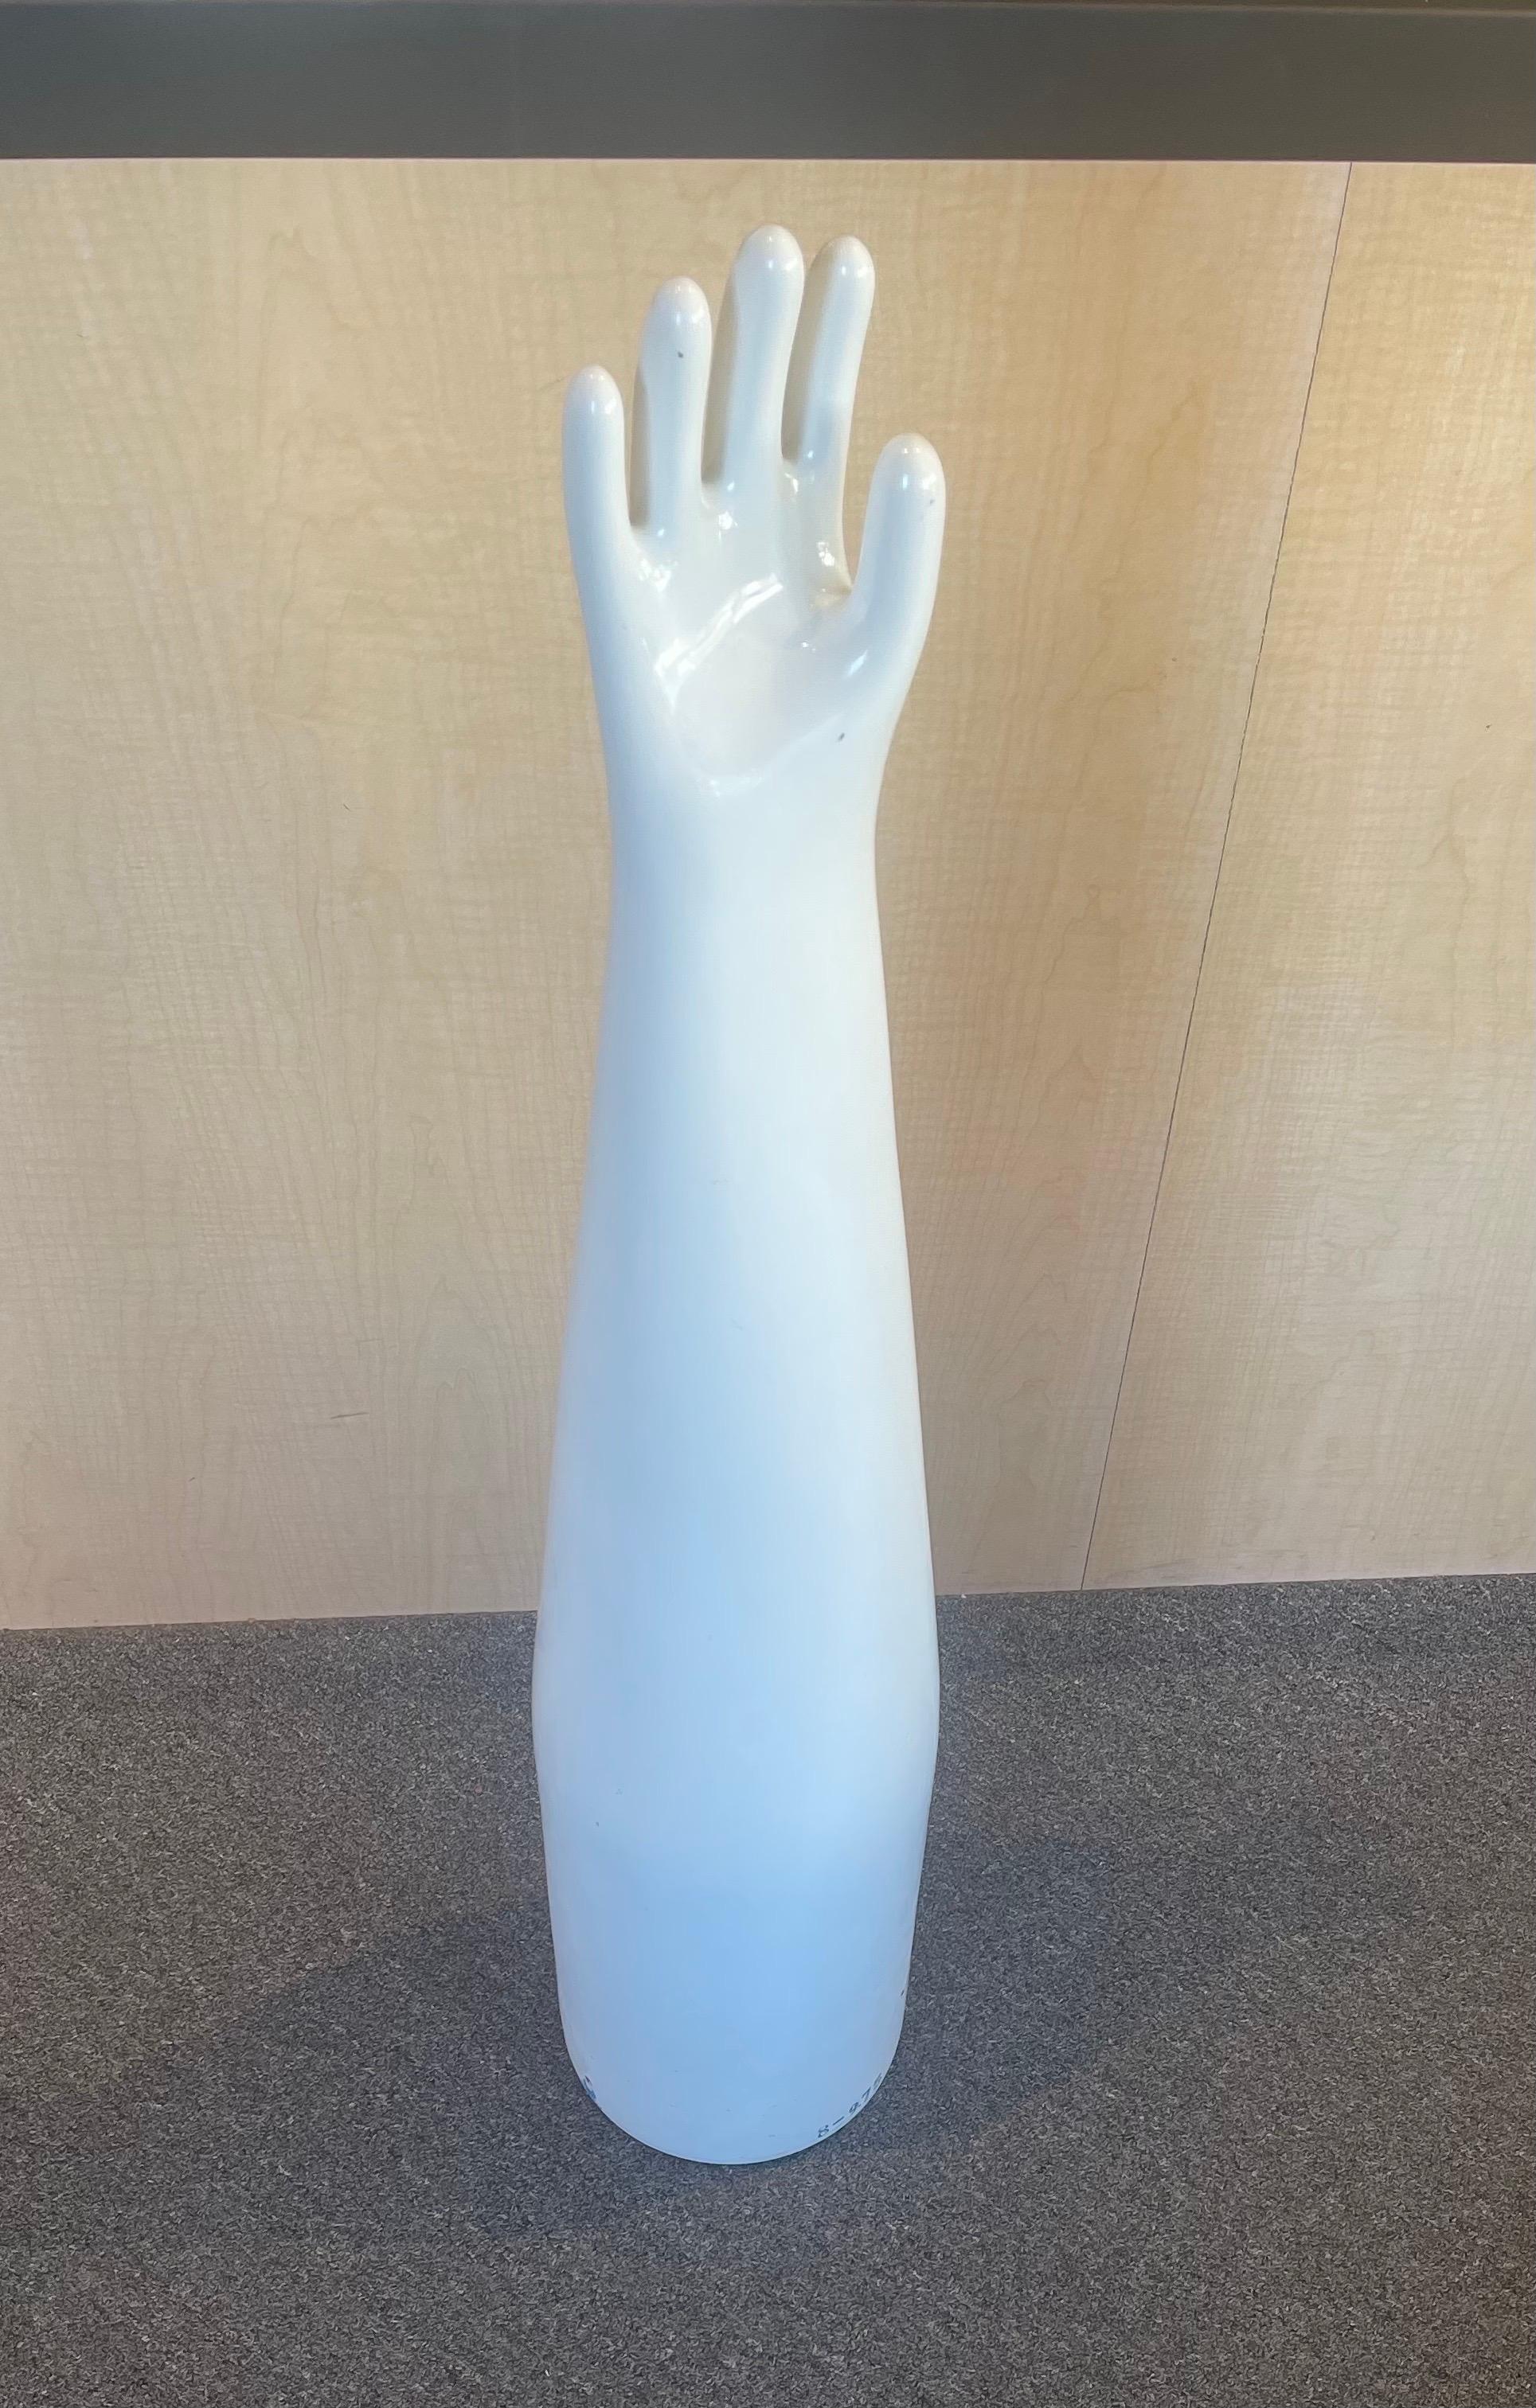 Massive industrial ceramic glove mold by Japnese manufacturer Shinko, circa 1970s. The piece is a cool decorative item that is in excellent condition and can stand as a floor piece; measures 39